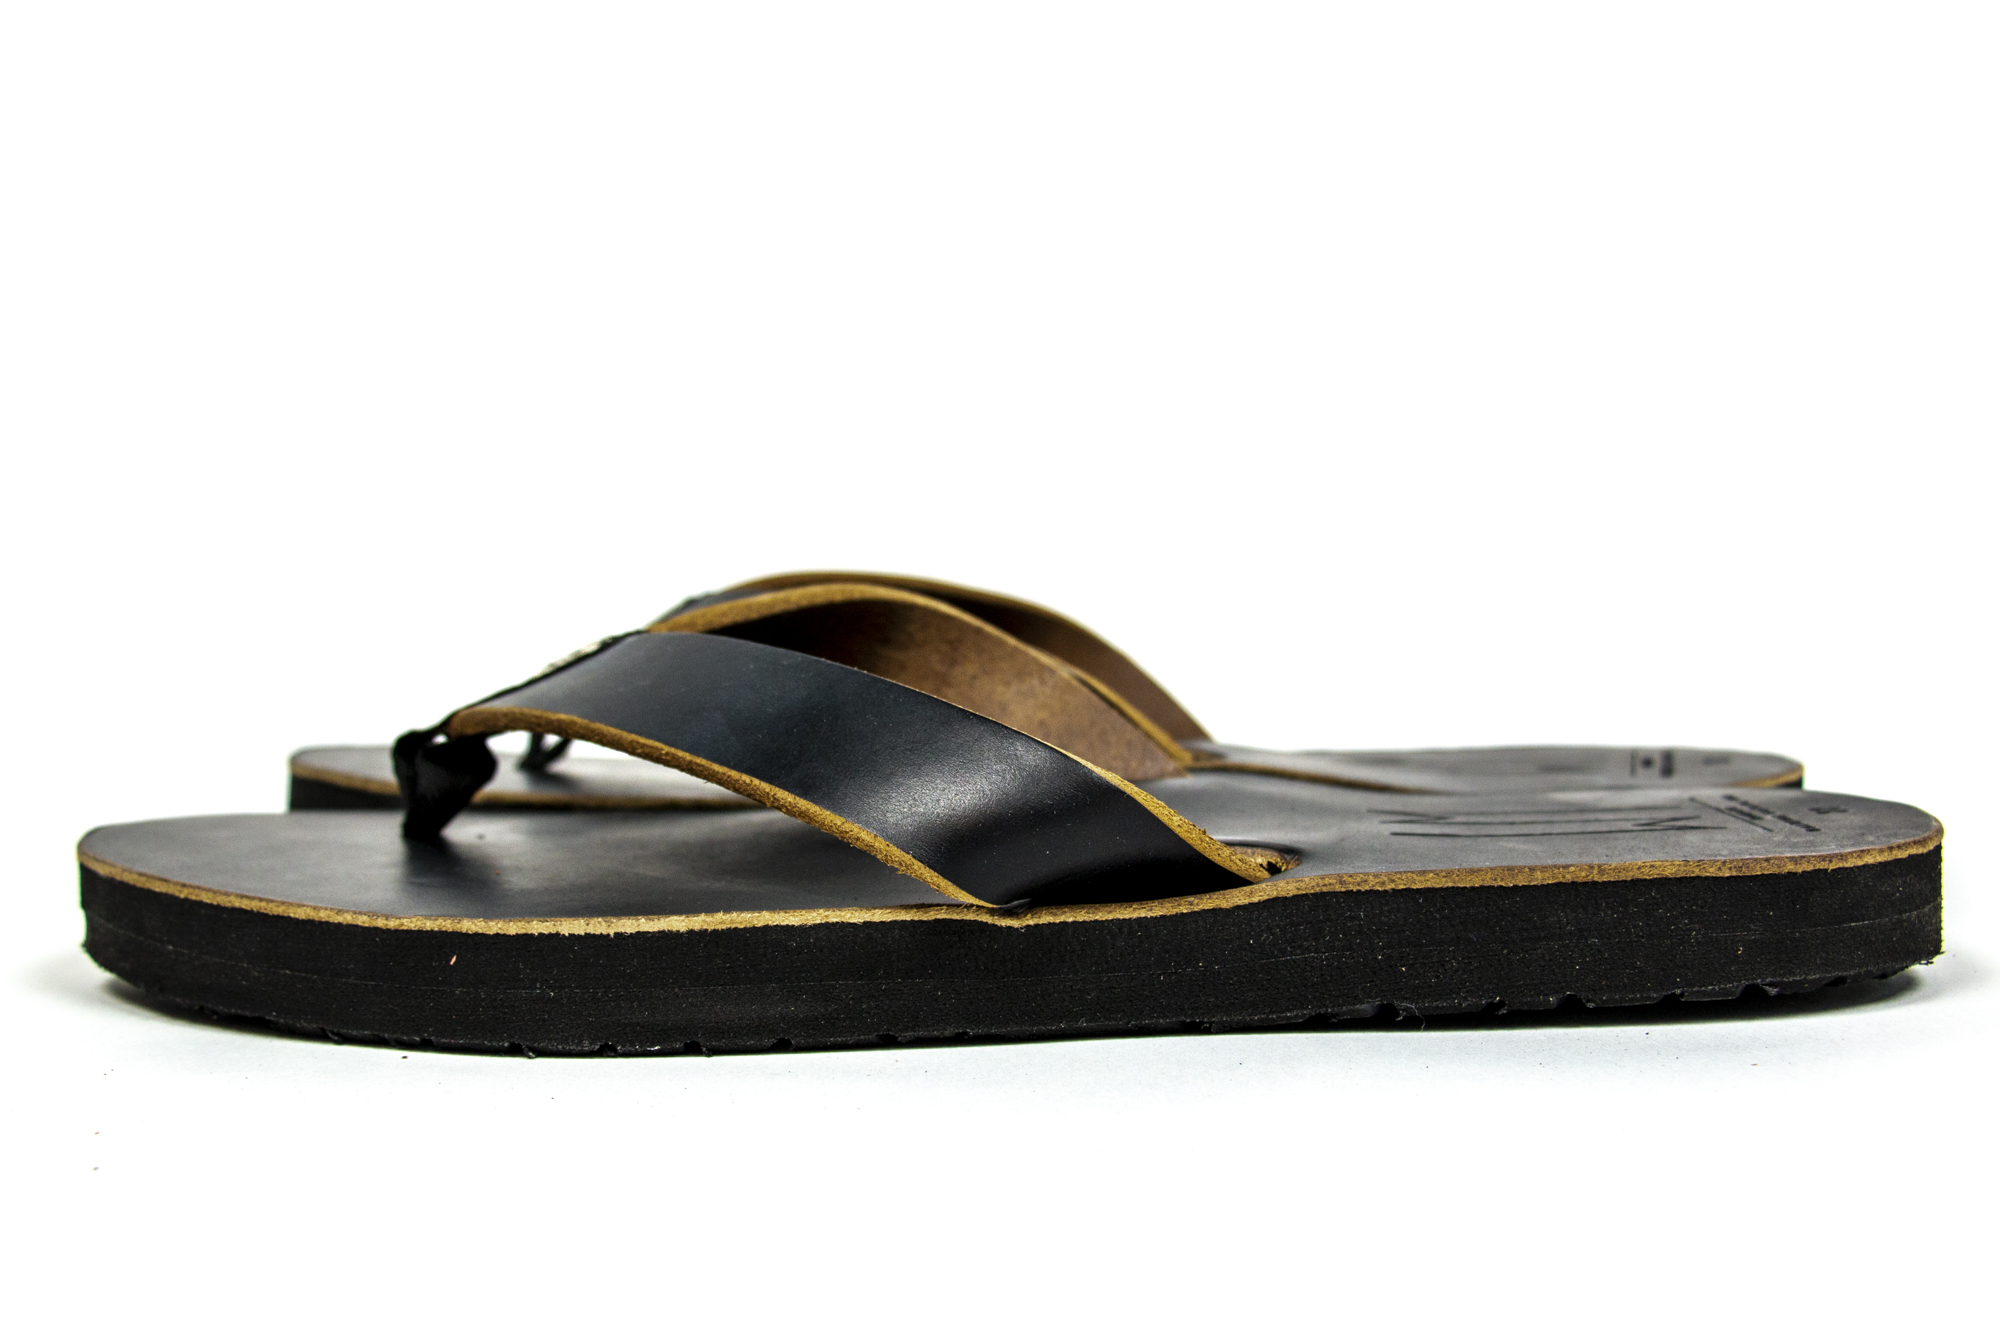 Waltzing Matilda – Leather Sandals Crafted In Maine